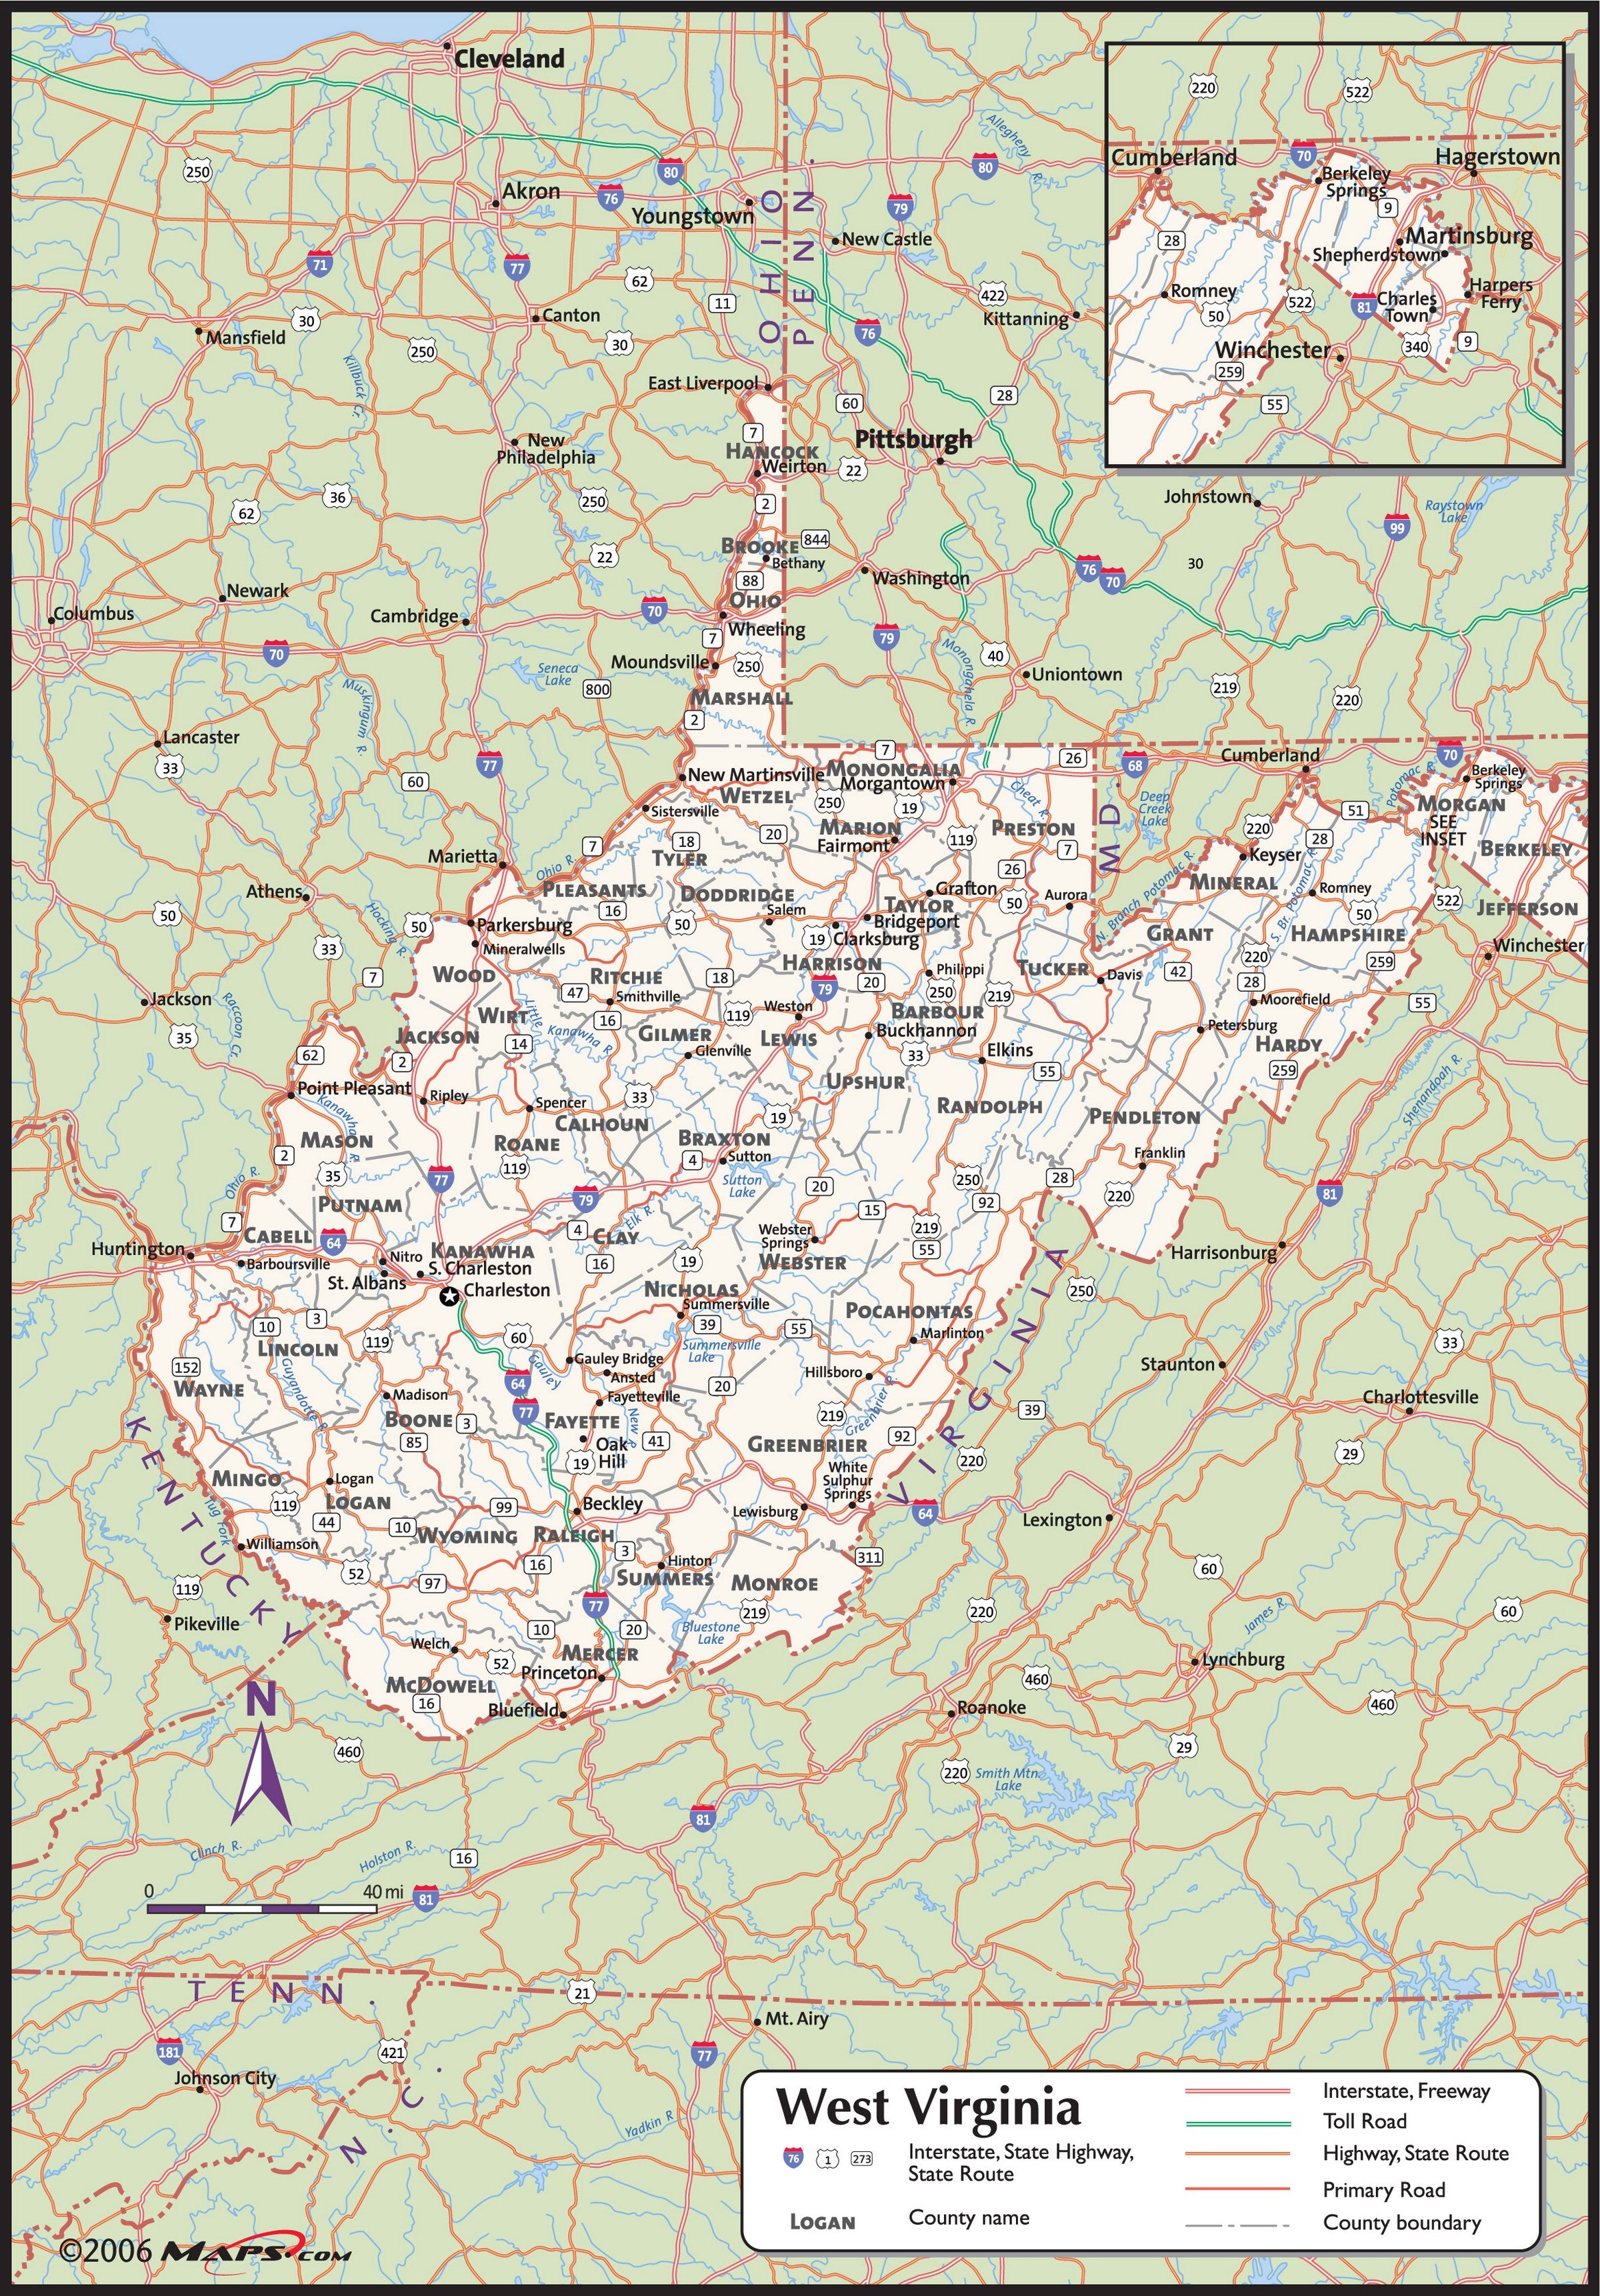 Map Of Virginia With County Lines - Map of world